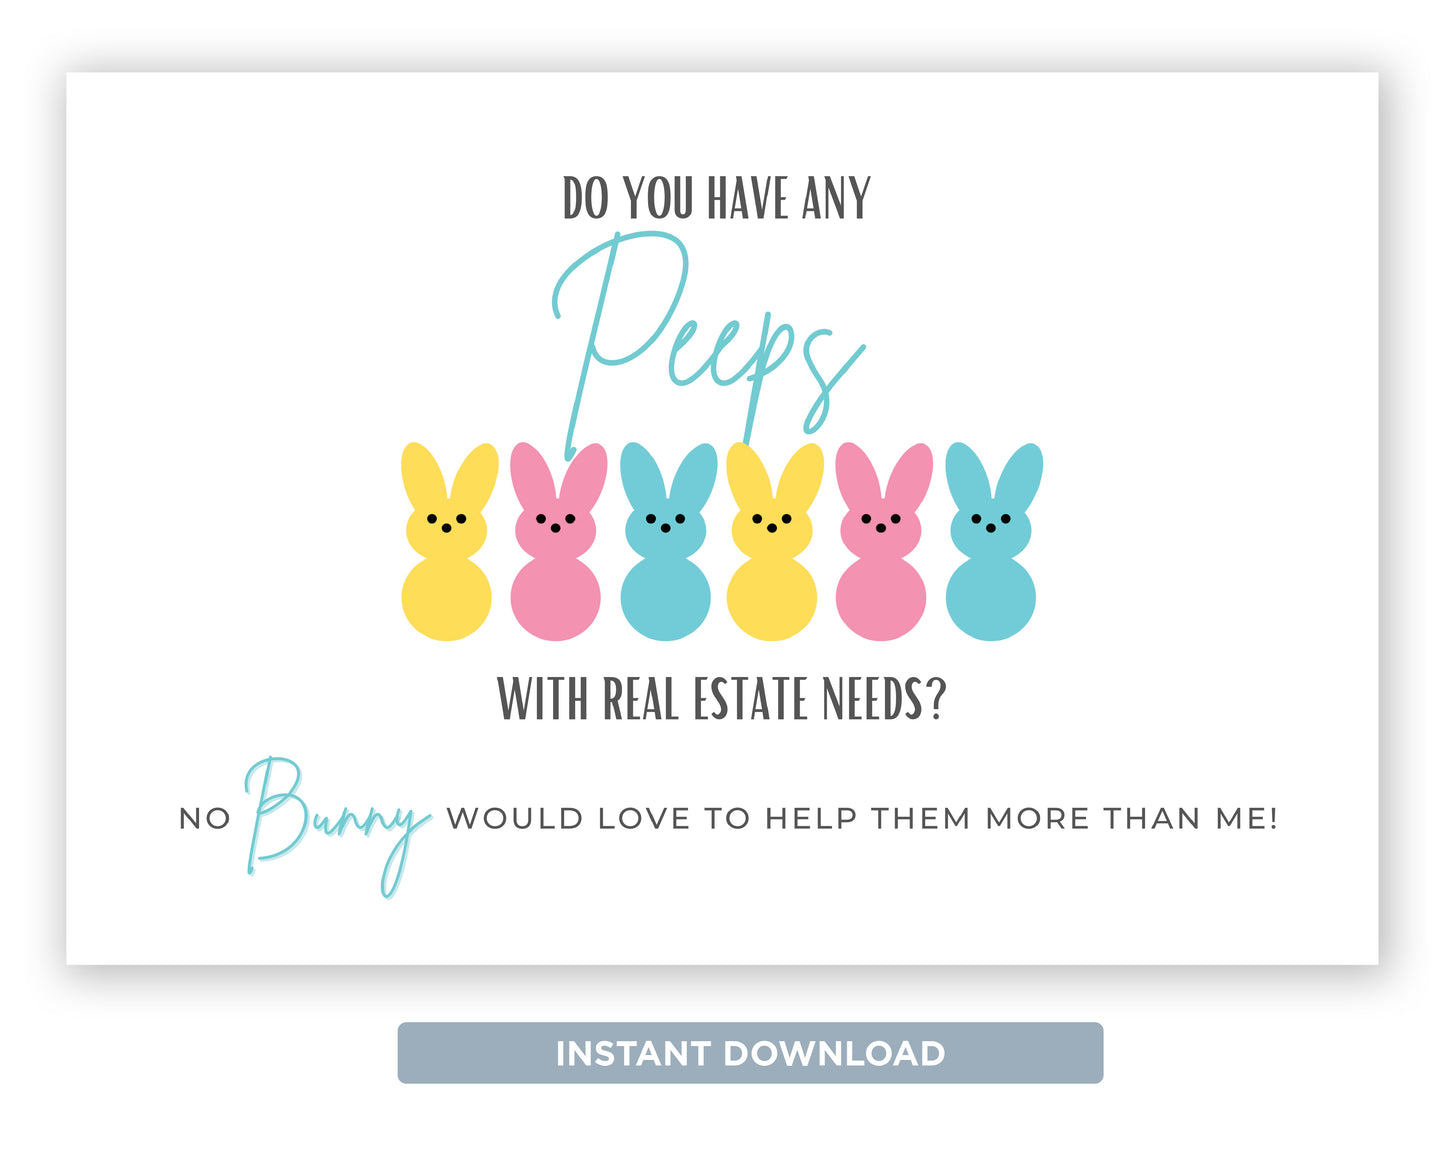 Do You Have Any Peeps 2 | Cute Real Estate Spring Postcard Download